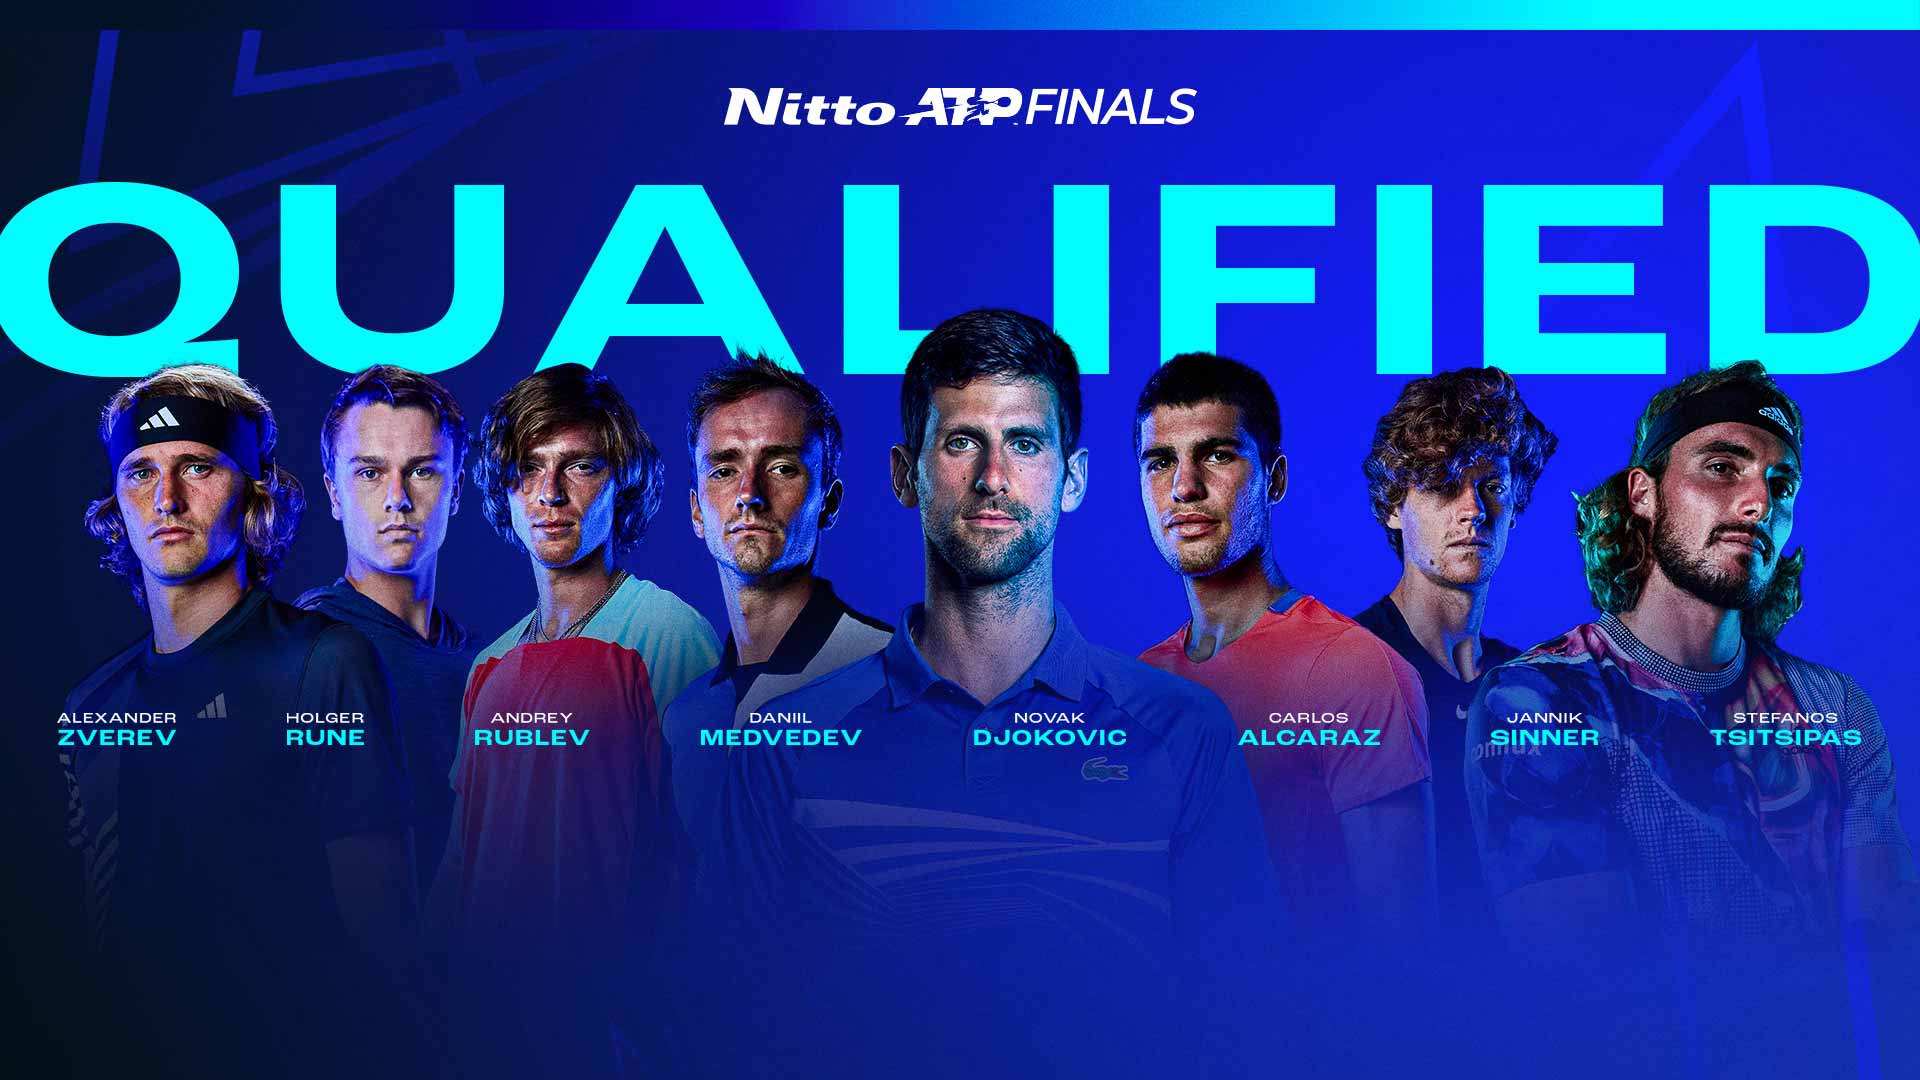 The 2023 Nitto ATP Finals will be played at the Pala Alpitour in Turin from 12-19 November.